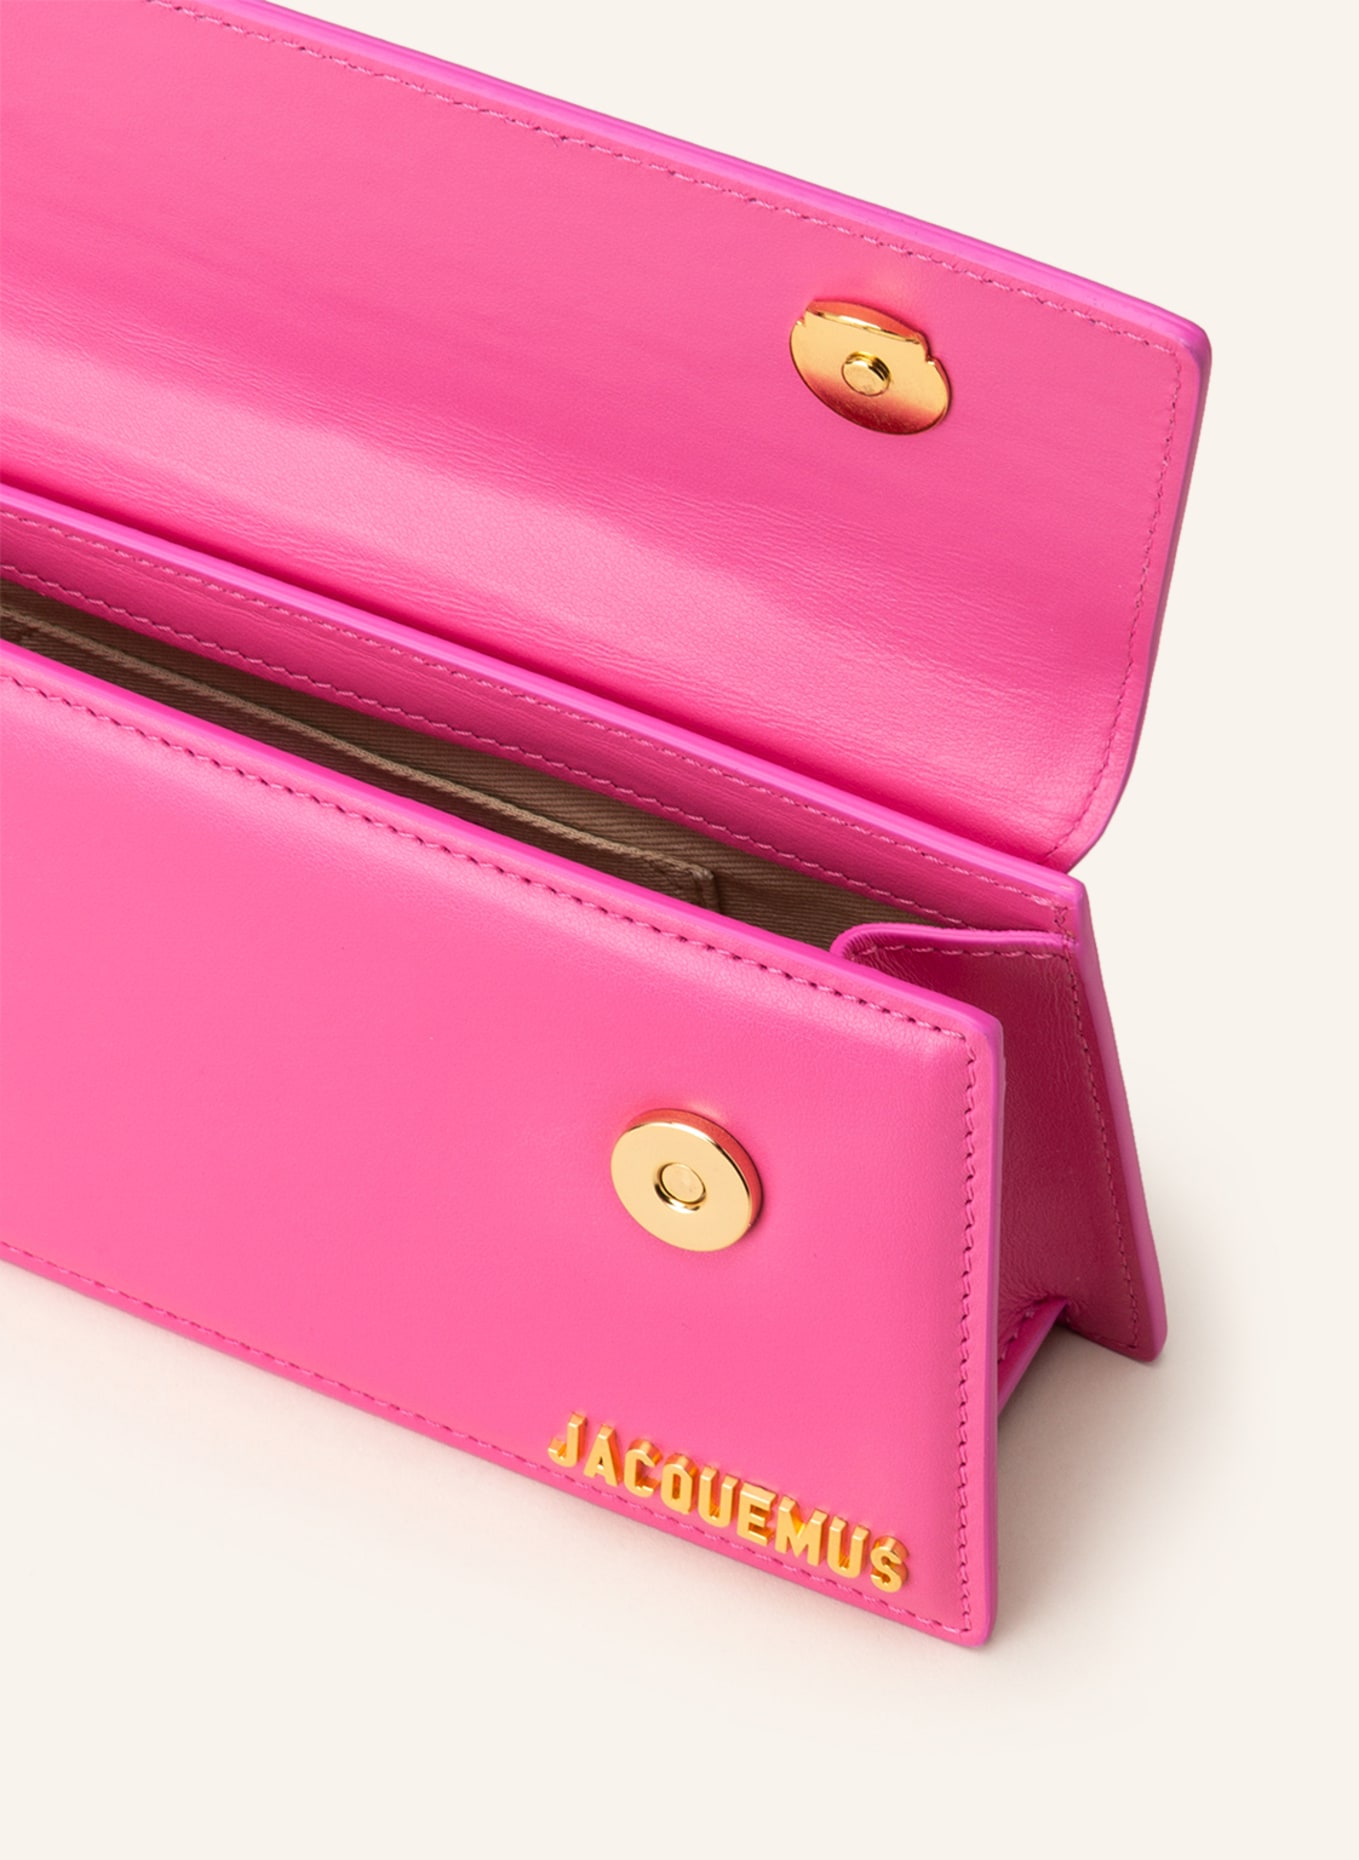 JACQUEMUS Handtasche LE CHIQUITO LONG , Farbe: PINK (Bild 3)